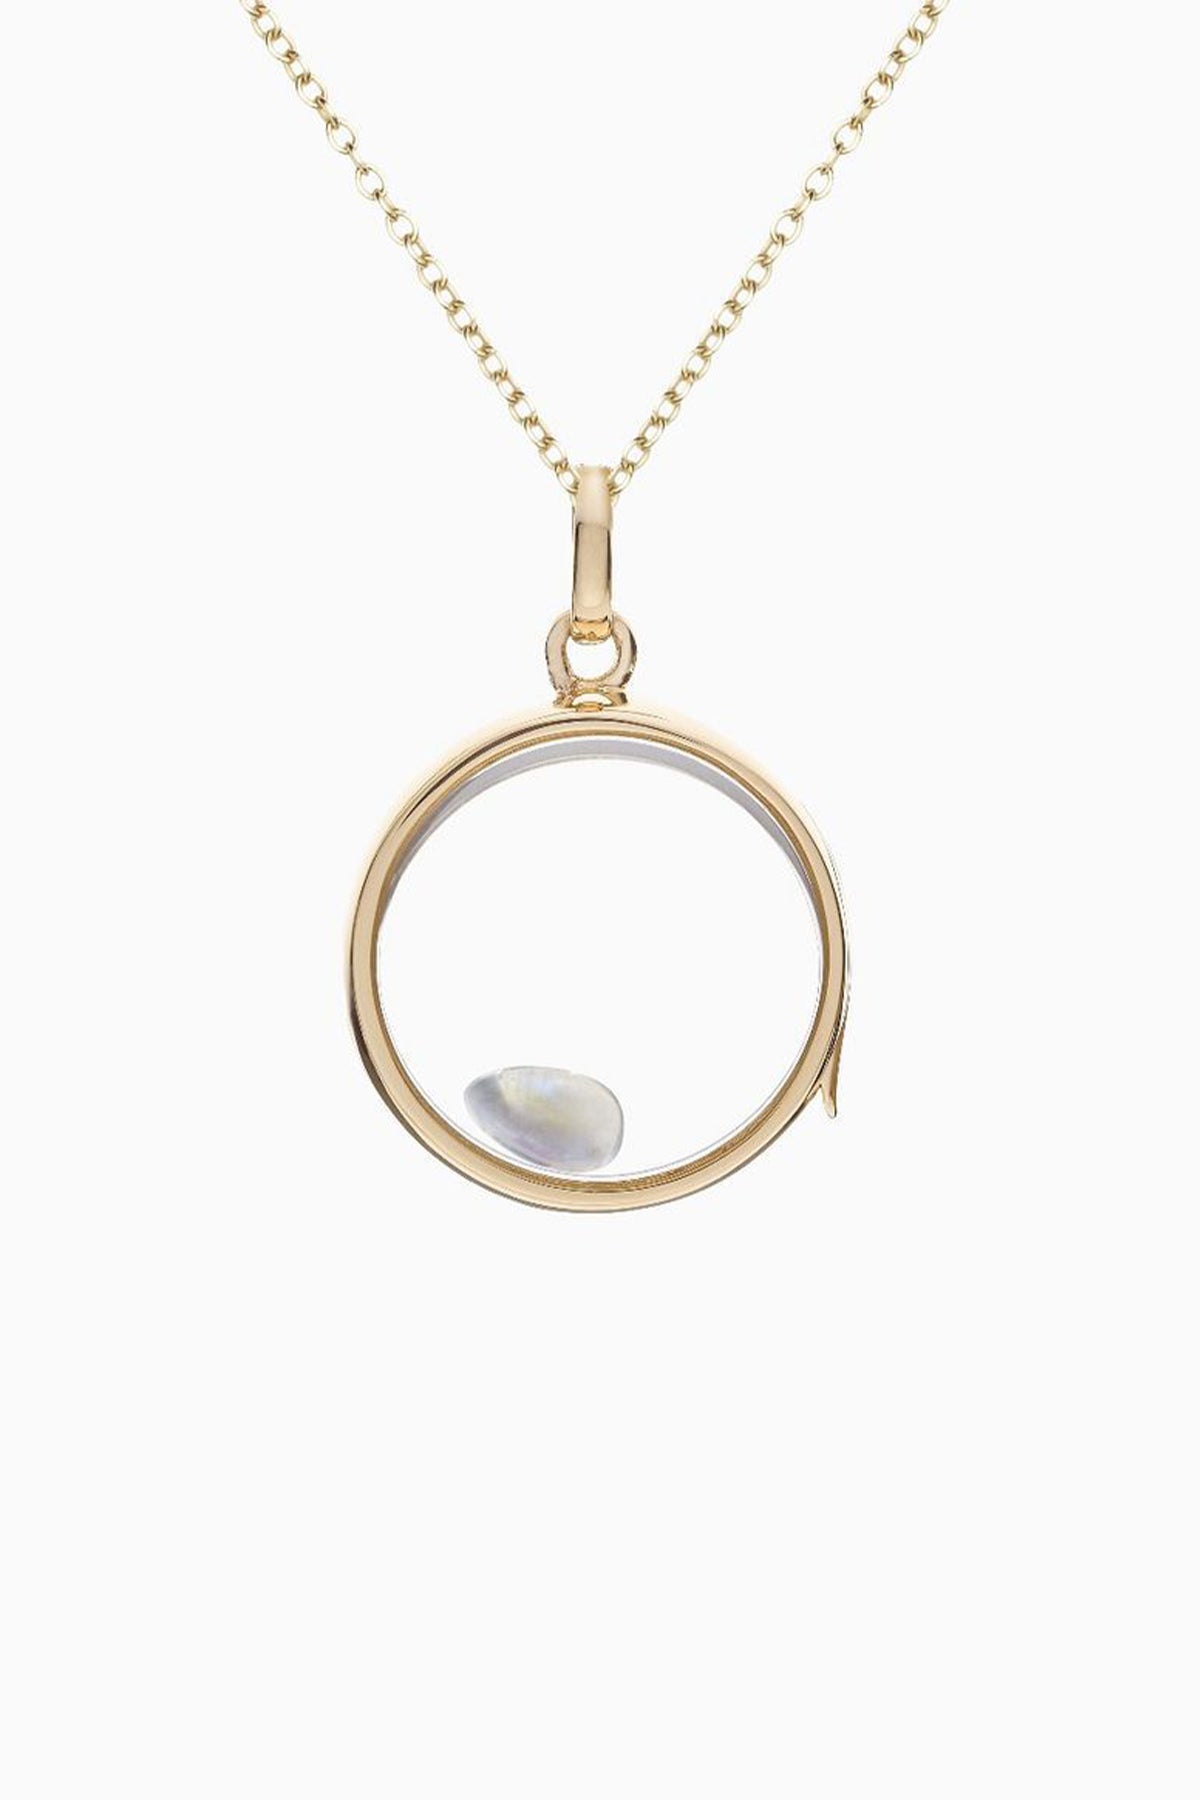 LOQUET LONDON | INTUITION MOONSTONE CHARM